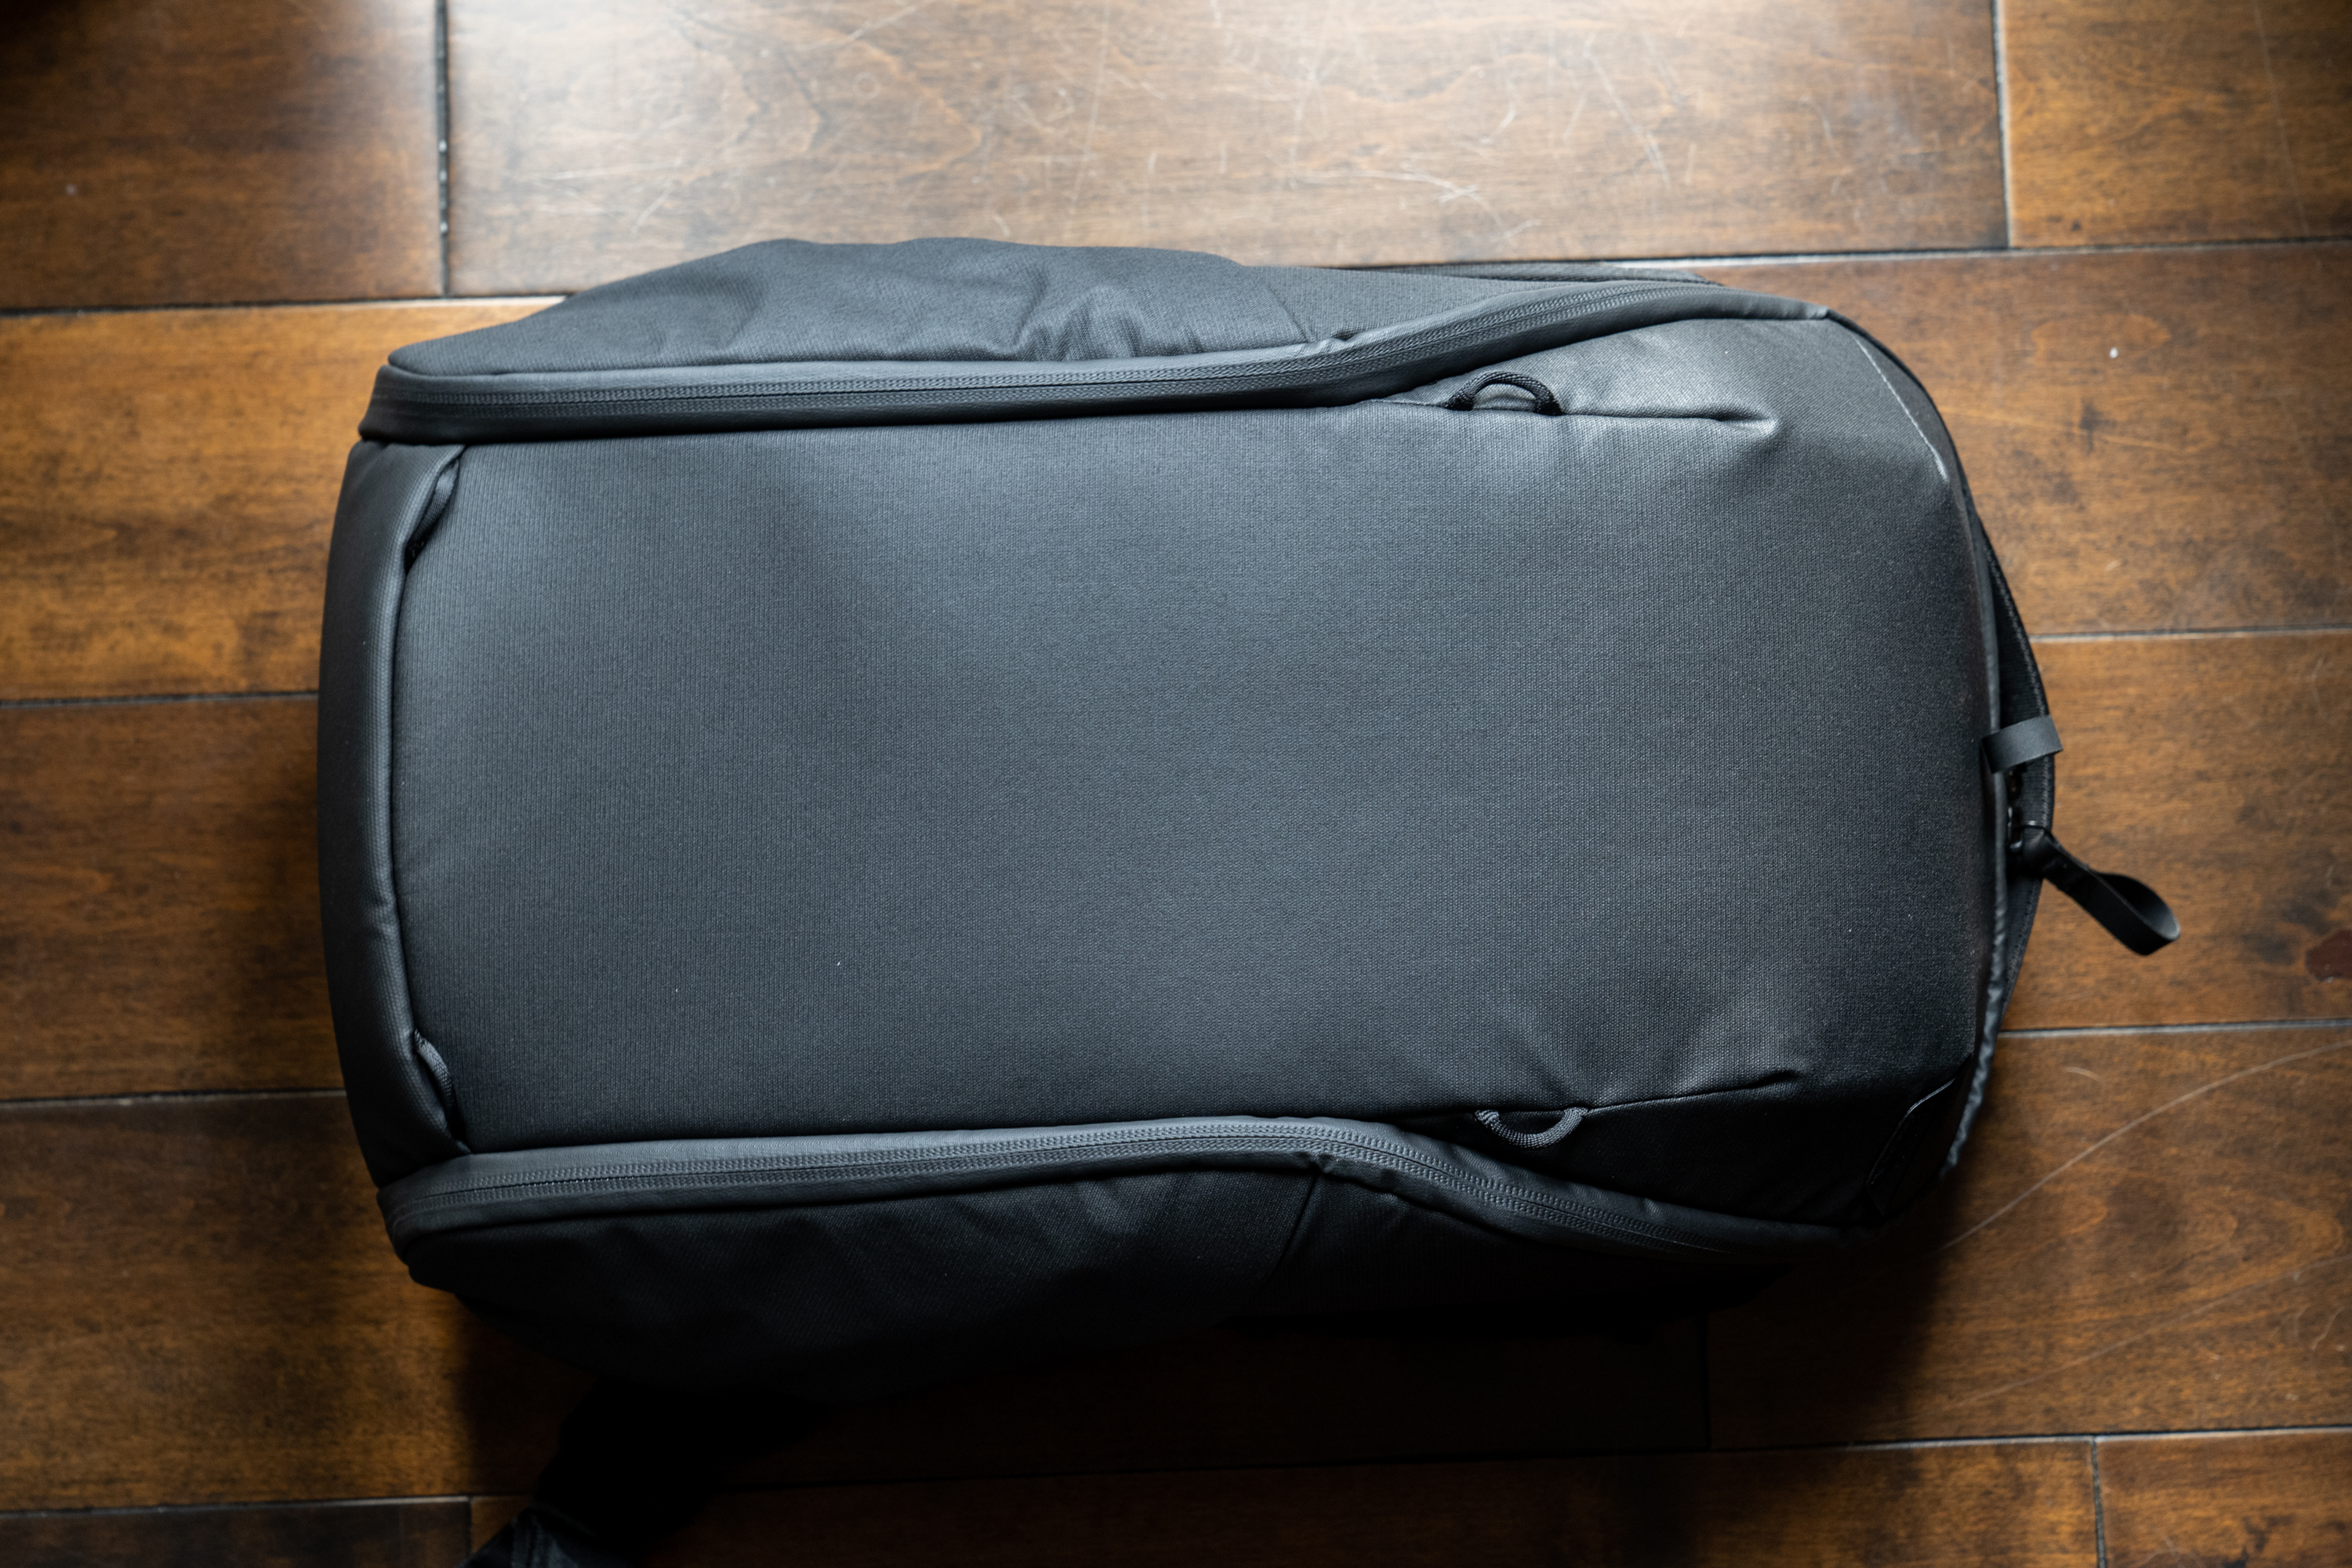 Peak Design’s Everyday Backpack Zip and Everyday Backpack V2 are top-notch photo and travel bags